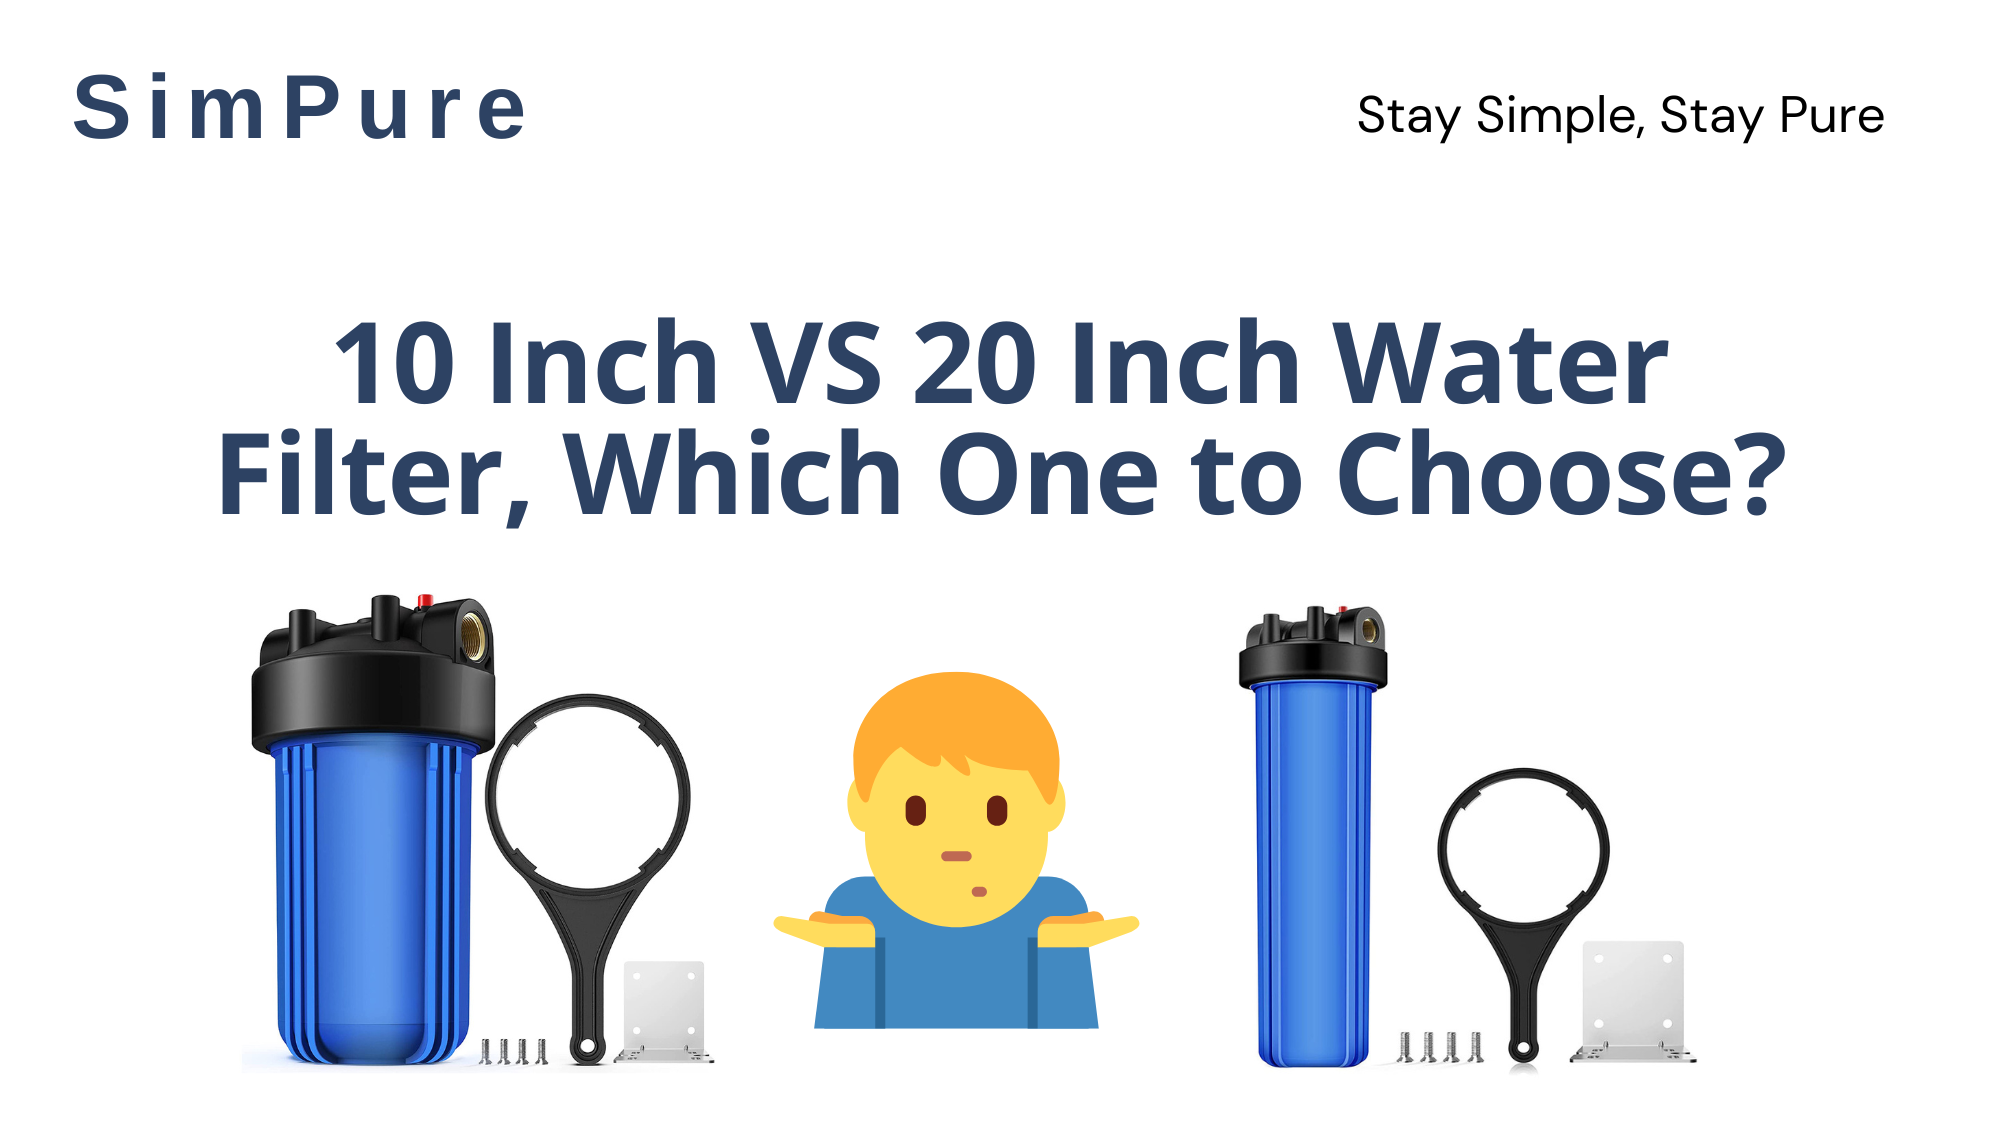 10 Inch VS 20 Inch Water Filter, Which One to Choose?